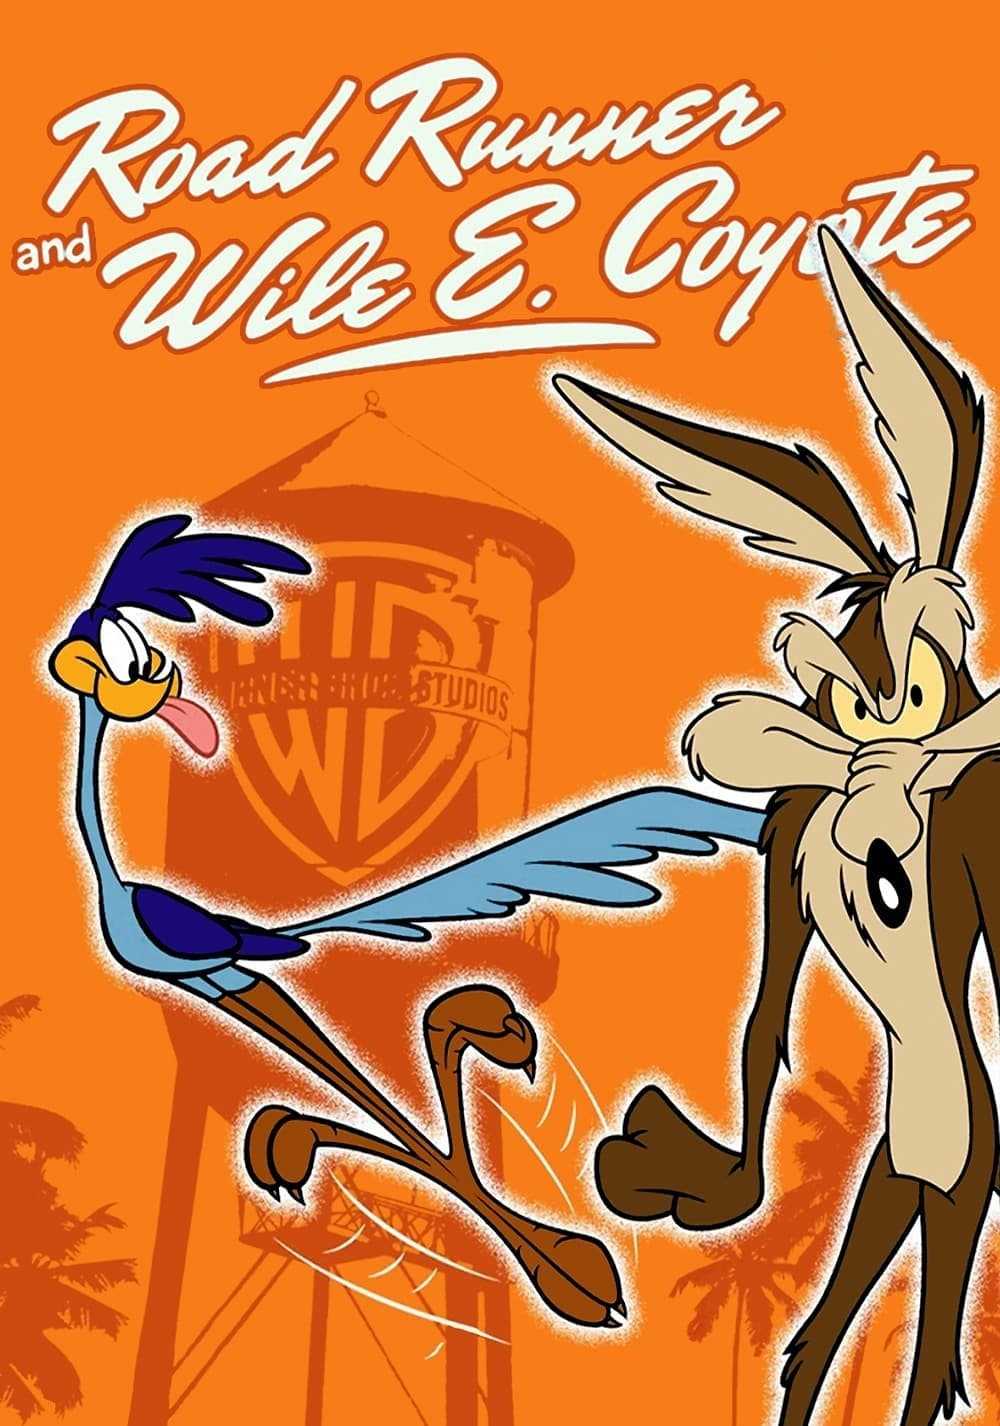 Willy il Coyote e Beep Beep in streaming